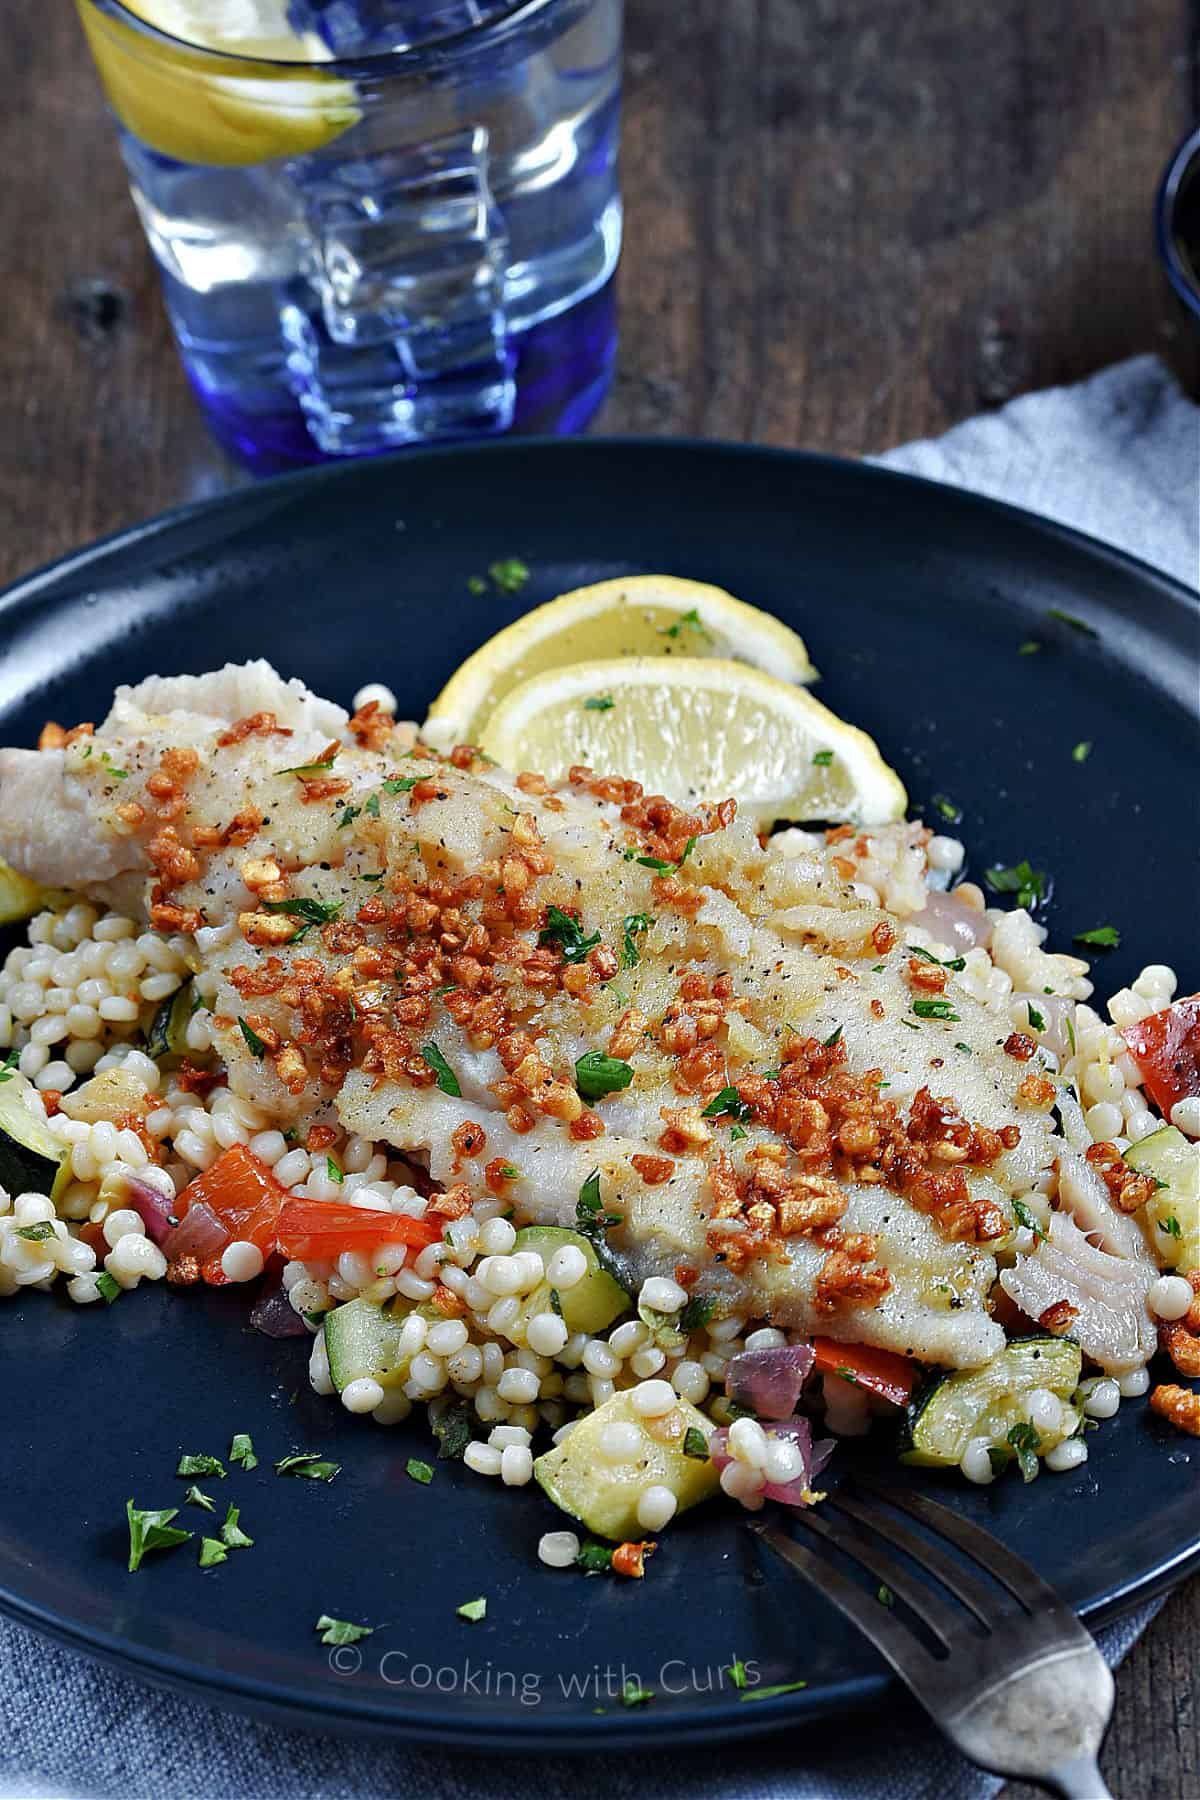 Sole with Caramelized Garlic on a bed of couscous with vegetables and lemon wedges on a dinner plate.